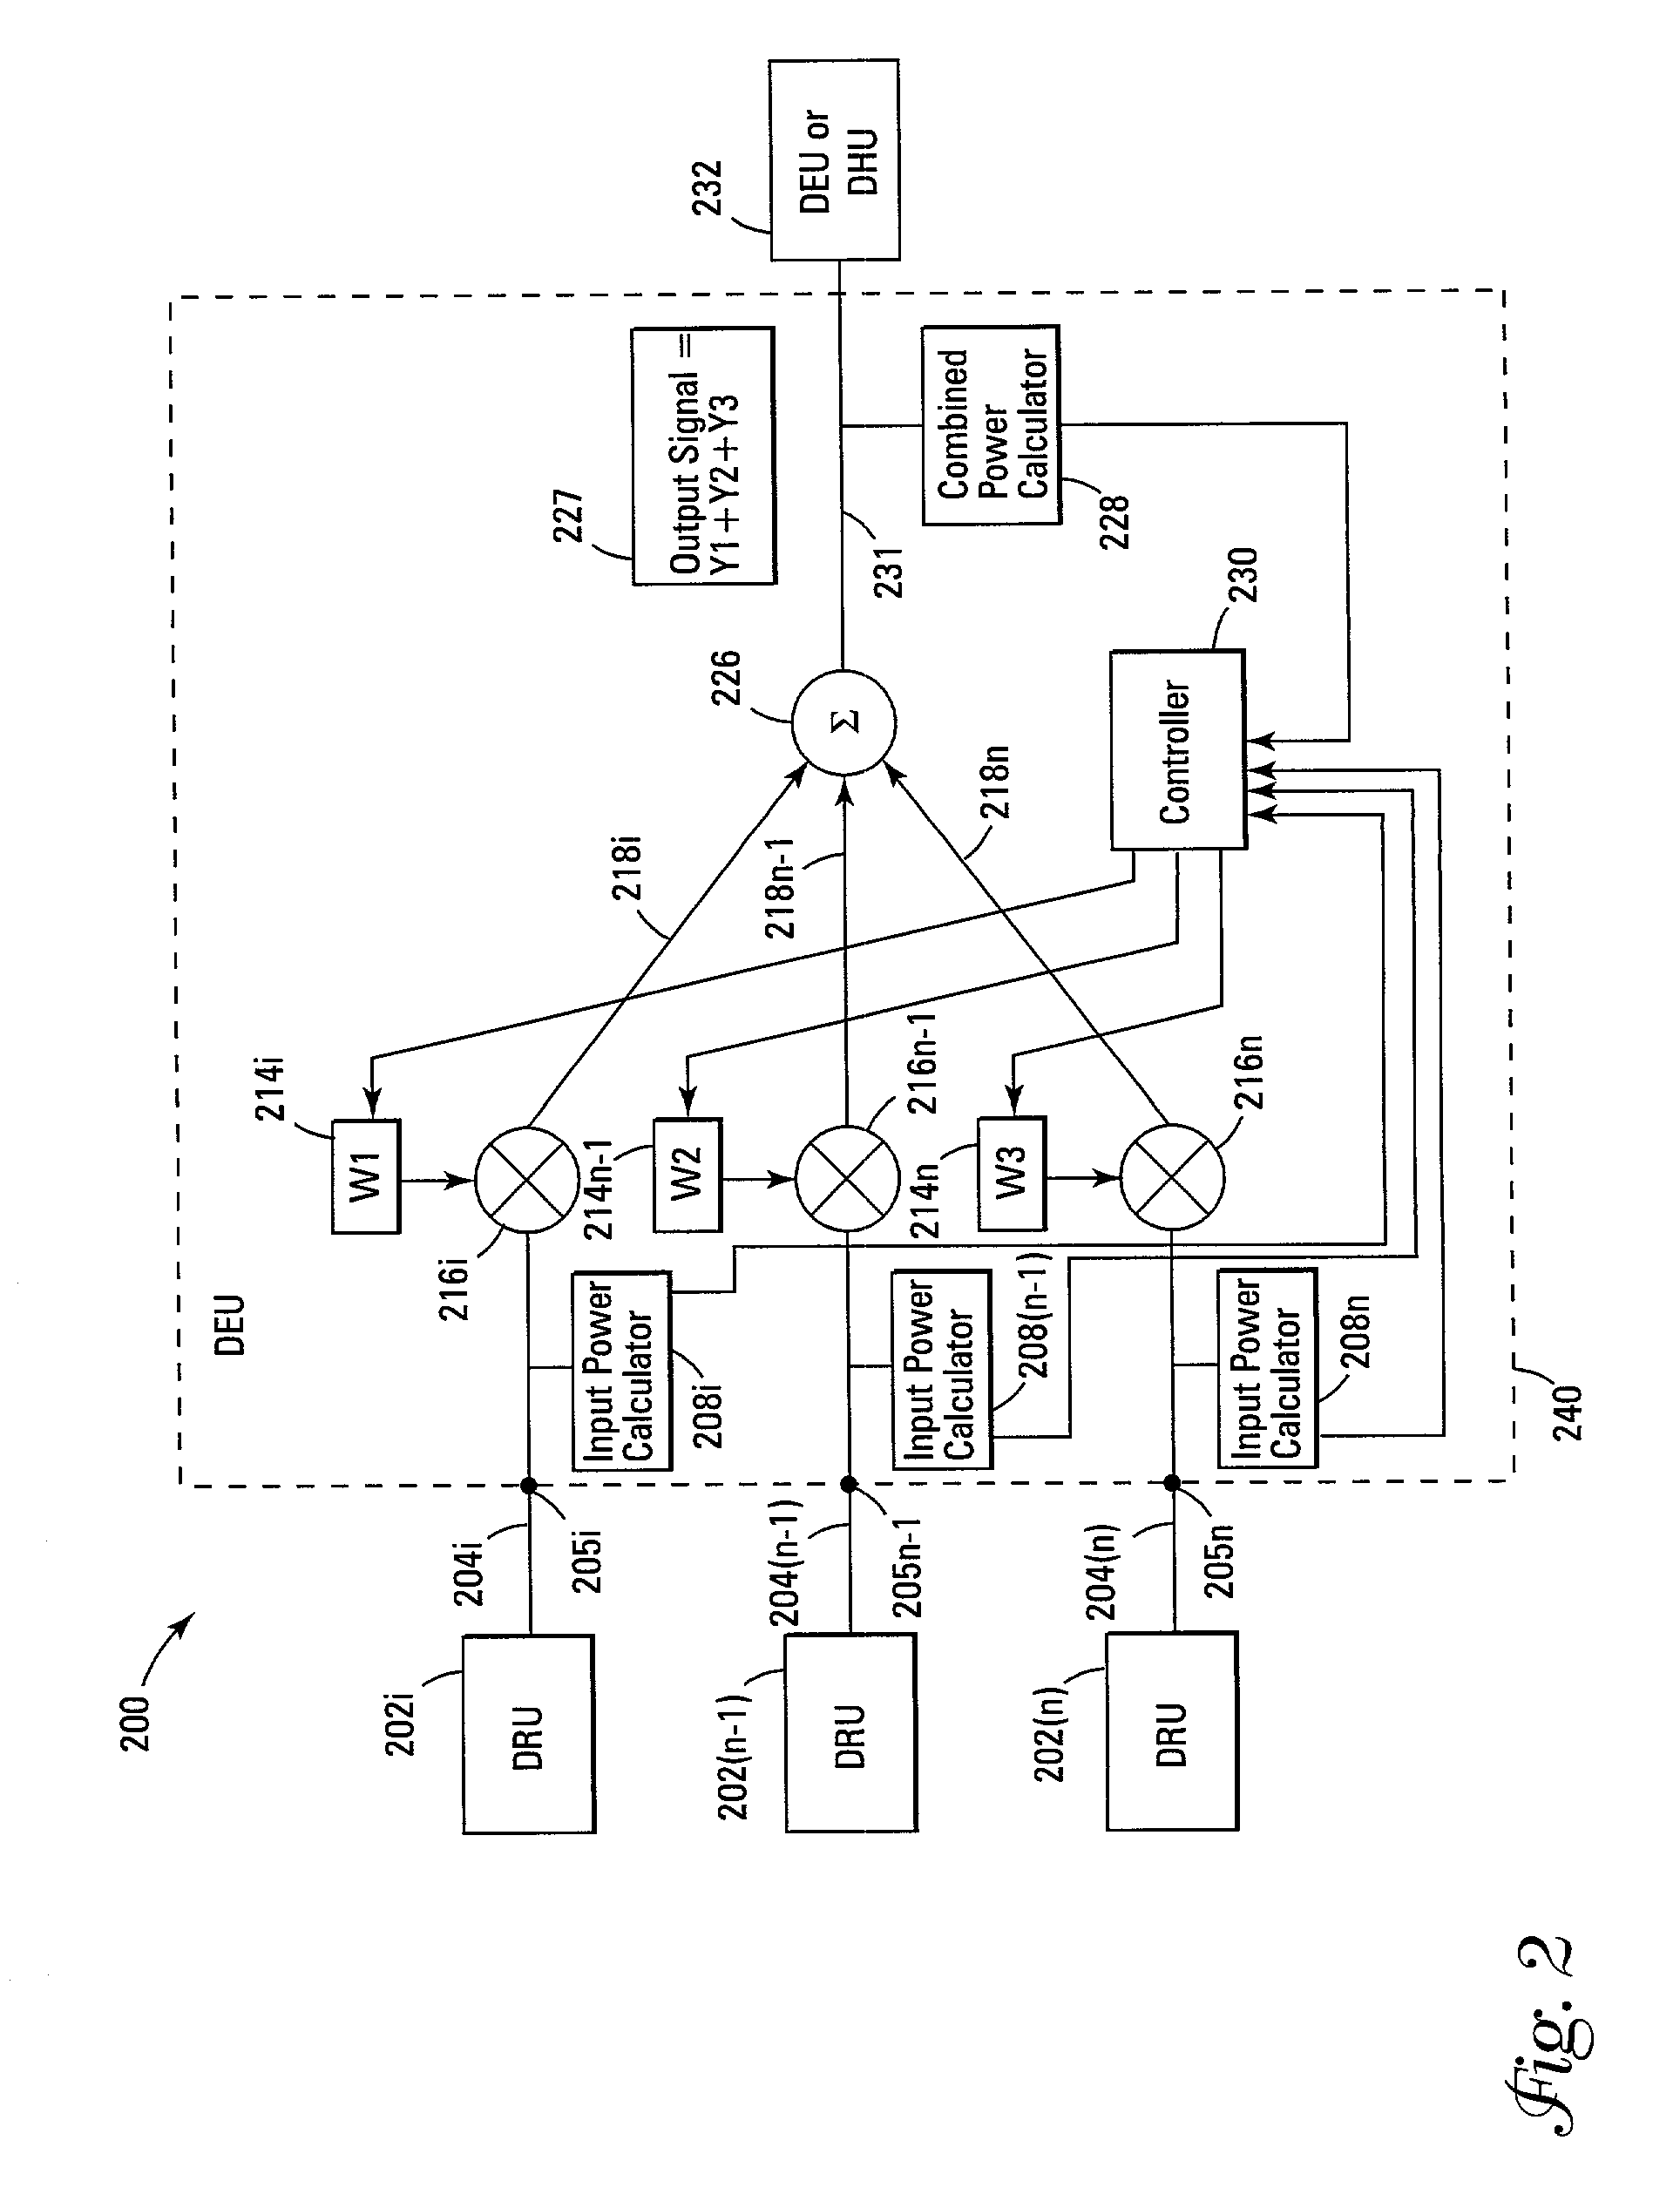 Distributed automatic gain control system